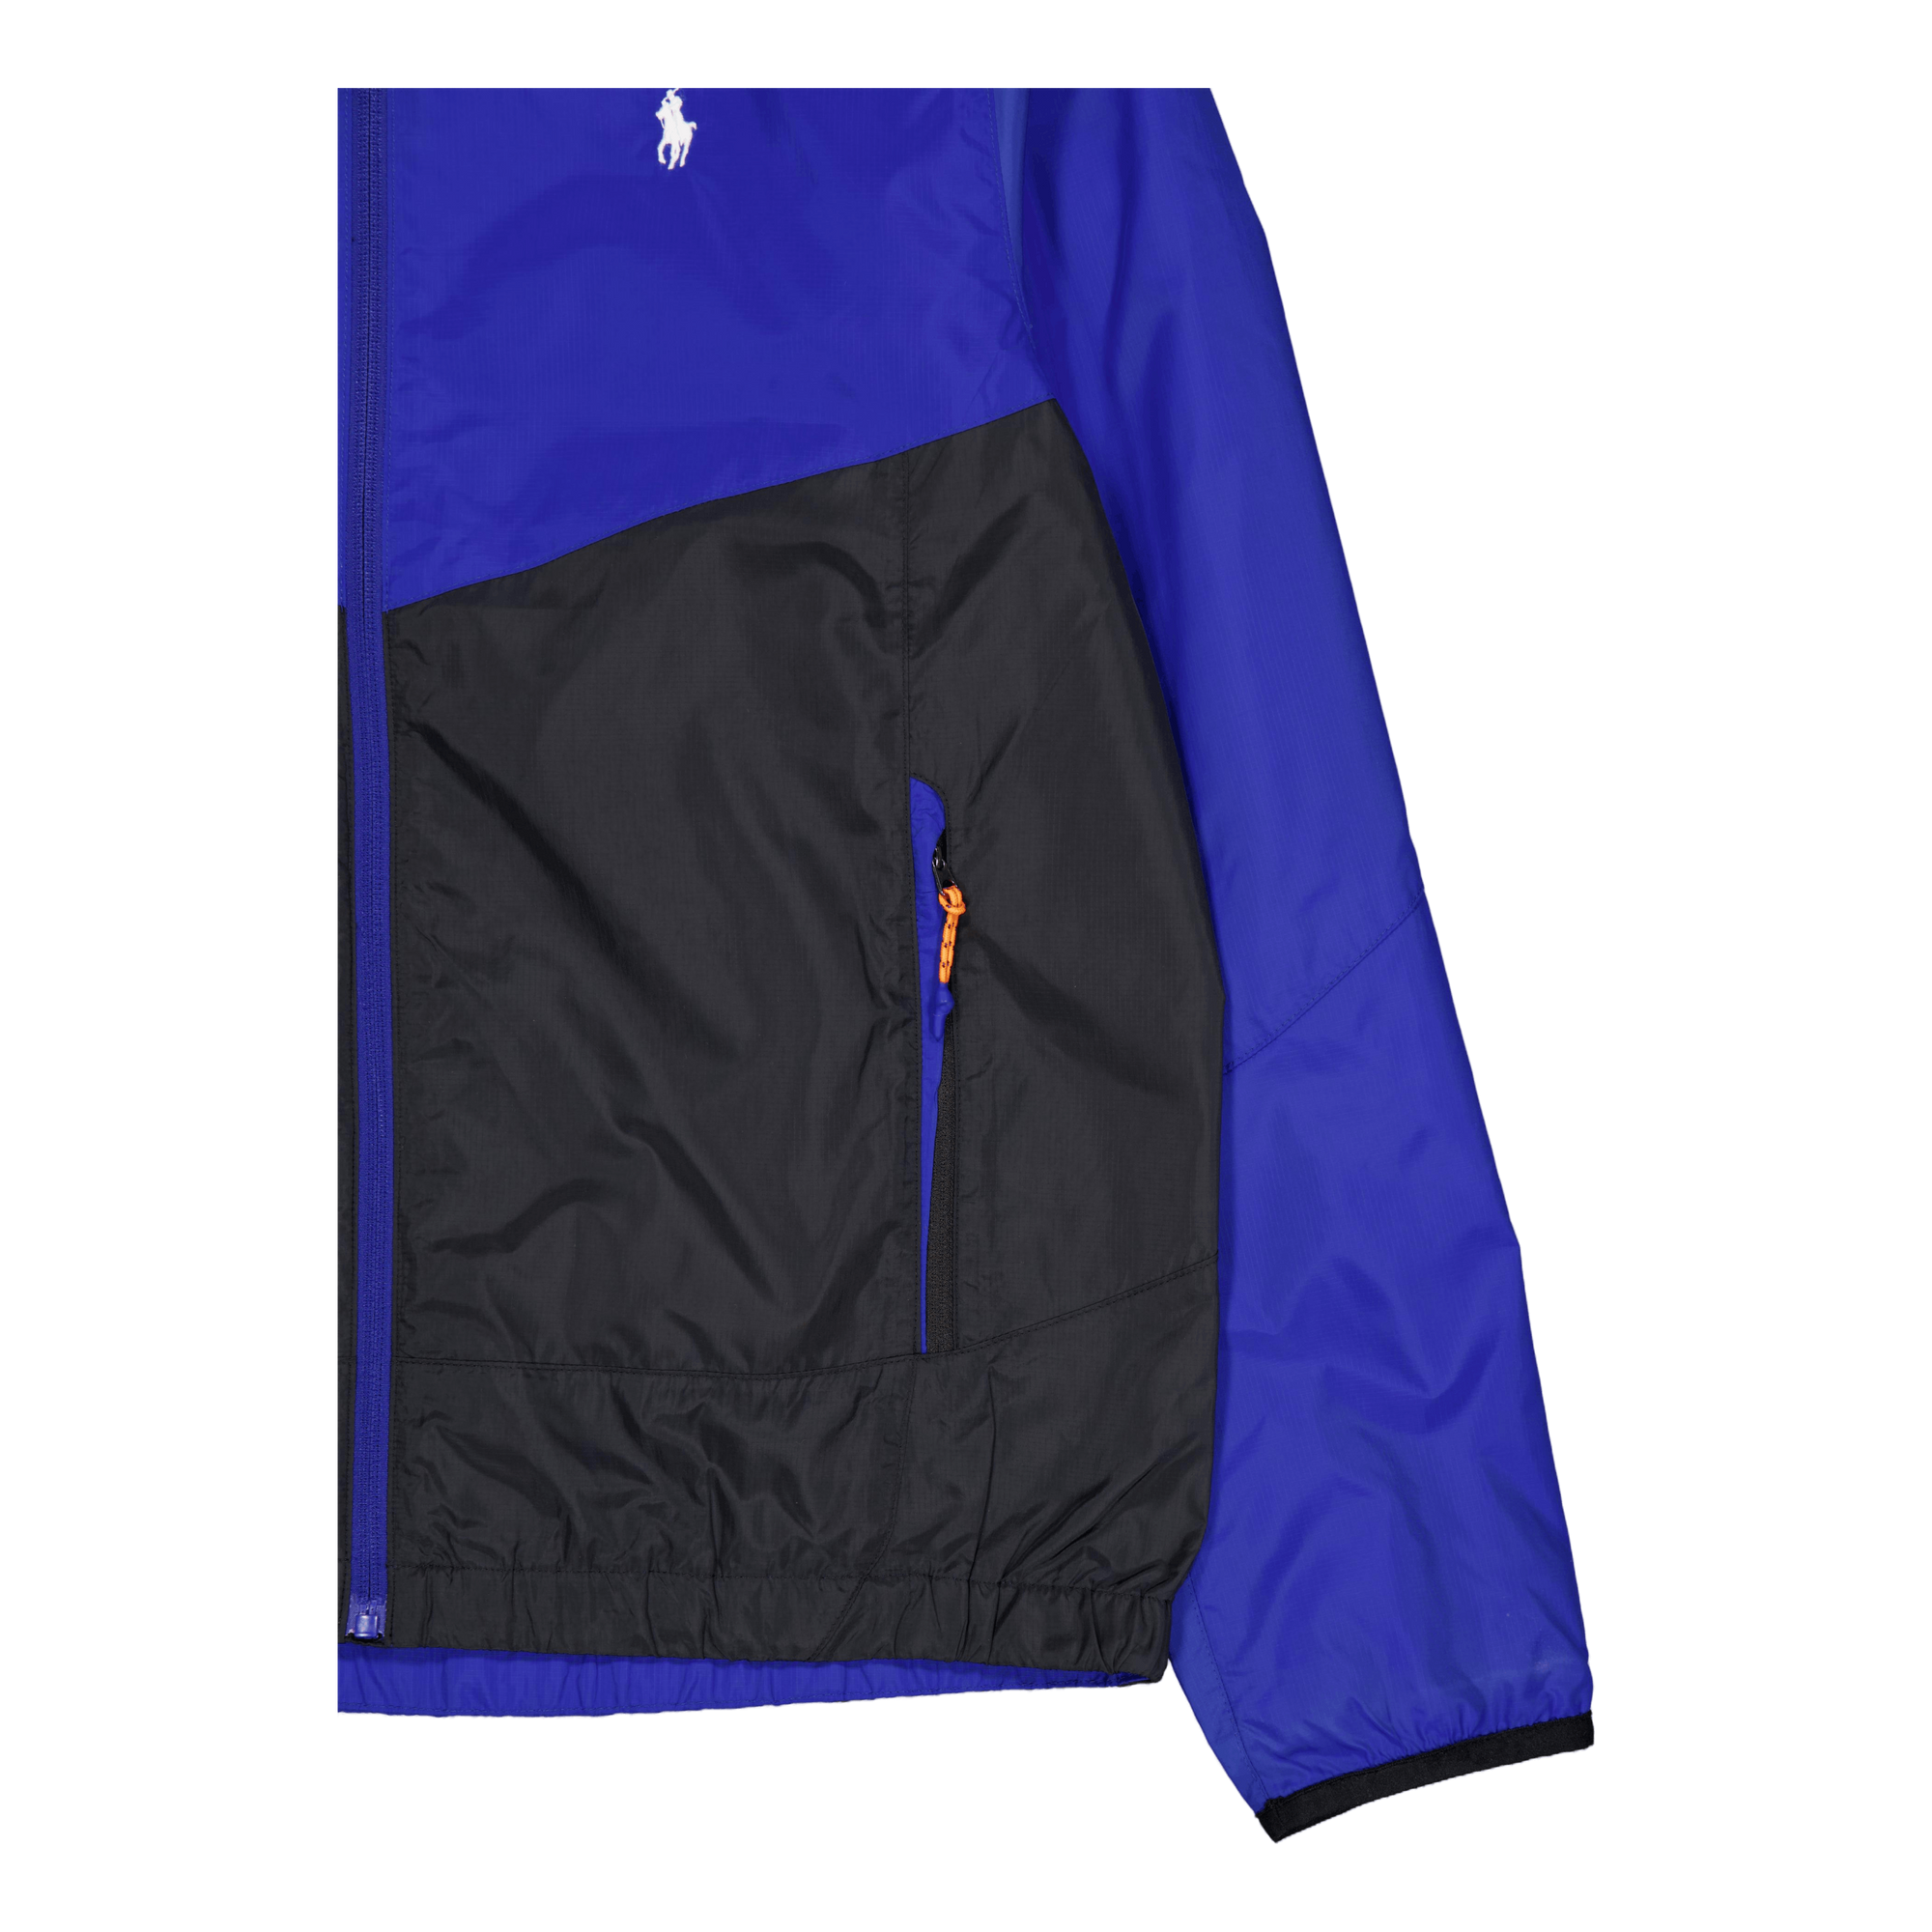 Water-Repellent Ripstop Jacket Sapphire Star / Polo Black